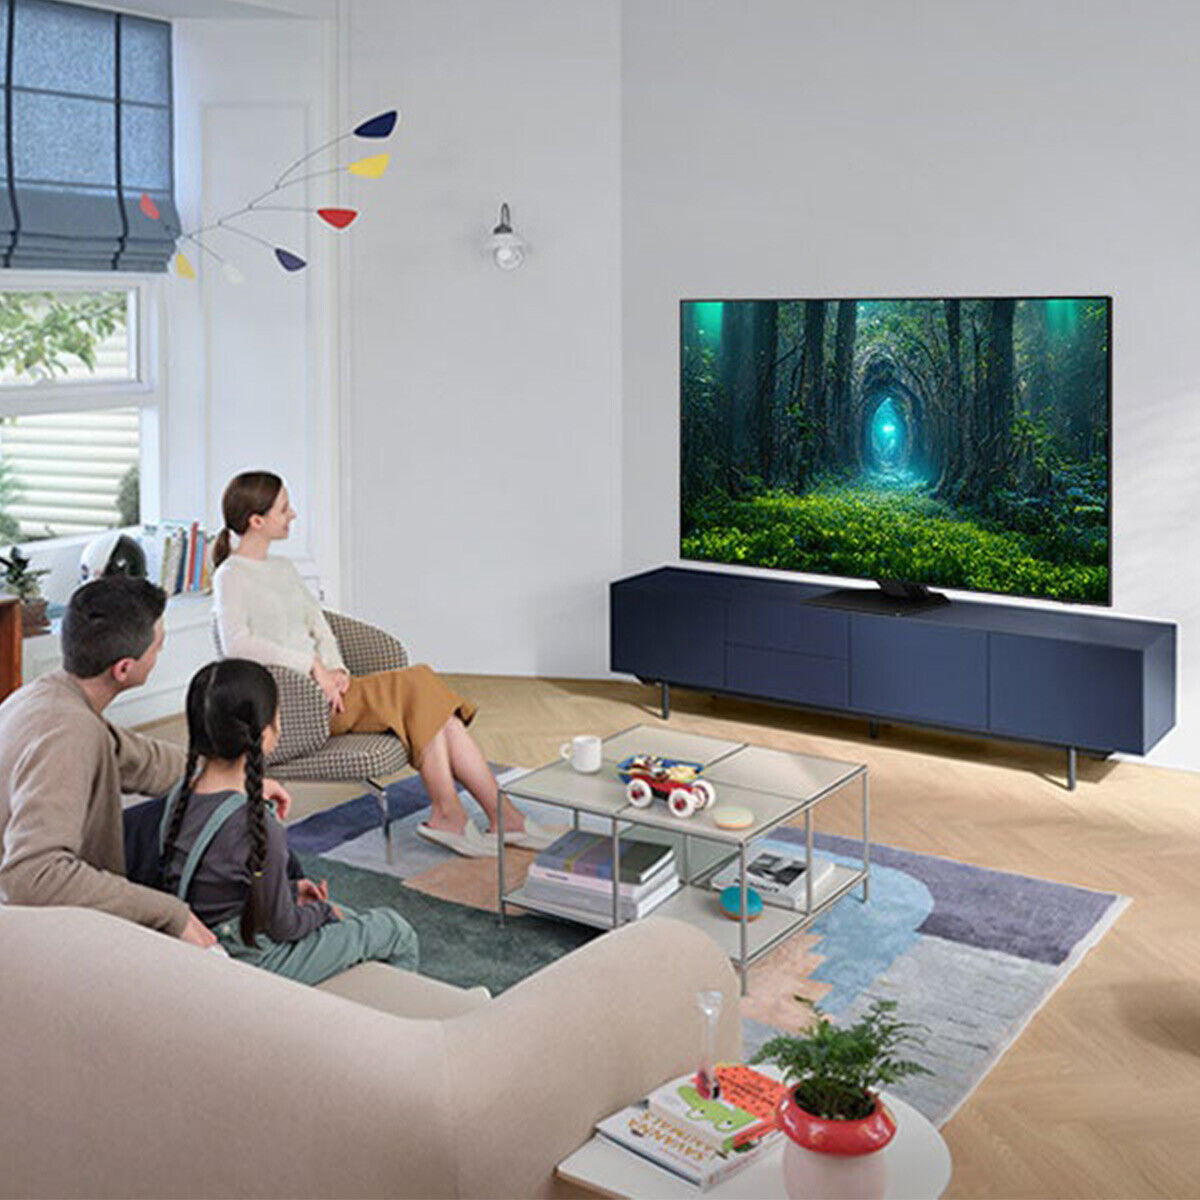 Samsung QN55QN85CA 55" Neo QLED 4K Smart TV with Quantum HDR, Dolby Atmos (2023)